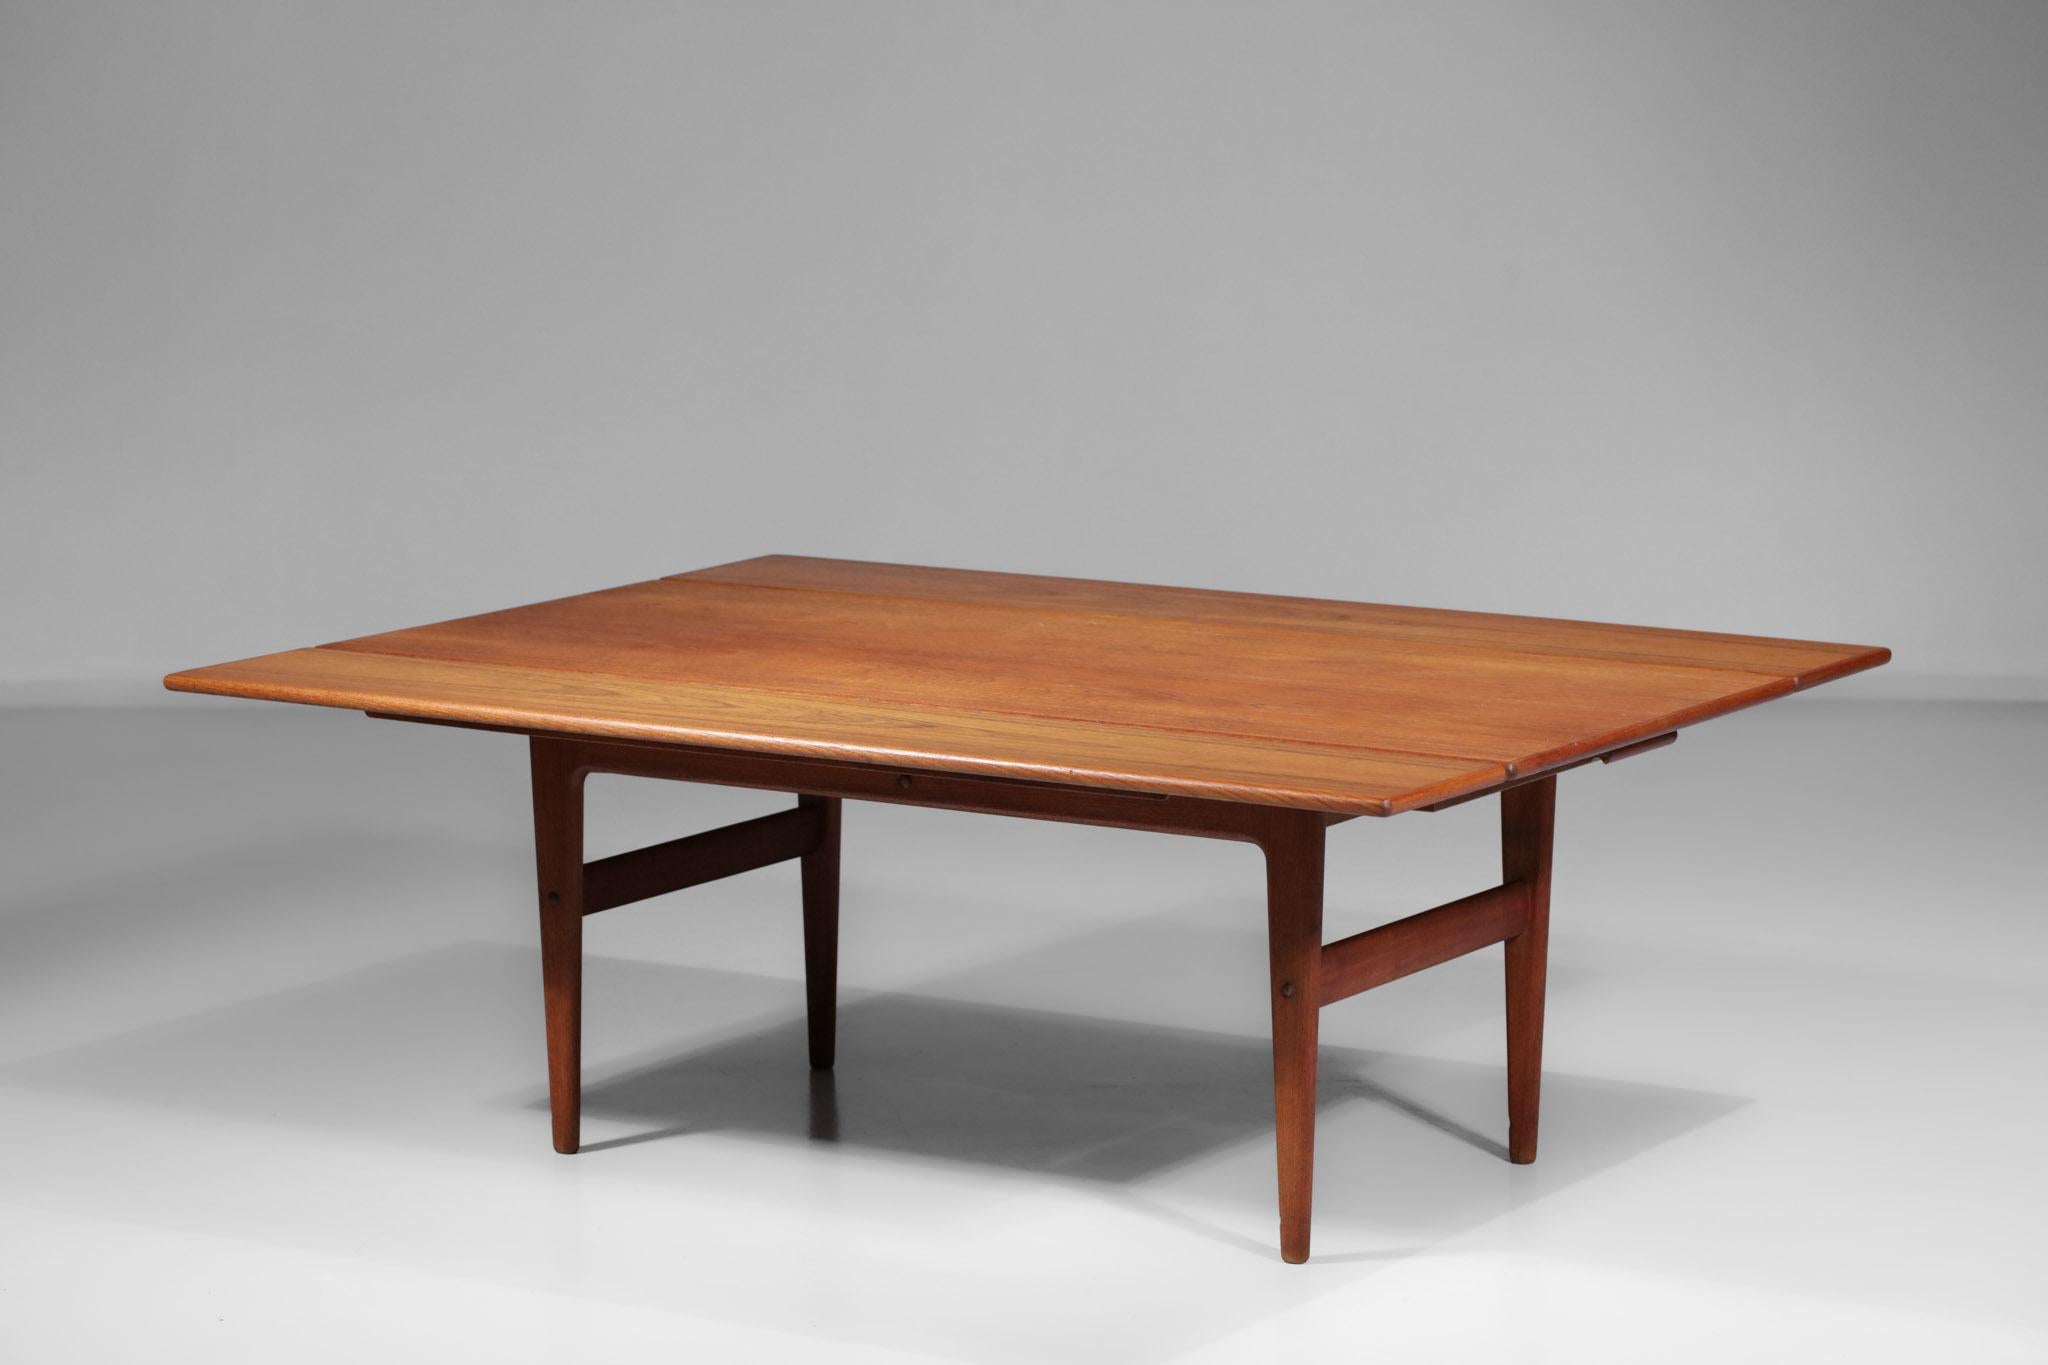 Danish coffee table from the 60's in solid teak, typical Scandinavian design. Very original and avant-garde composition for the time with a clever system of extensions and risers, possibility to transform this nice coffee table ( 52 cm high ) into a